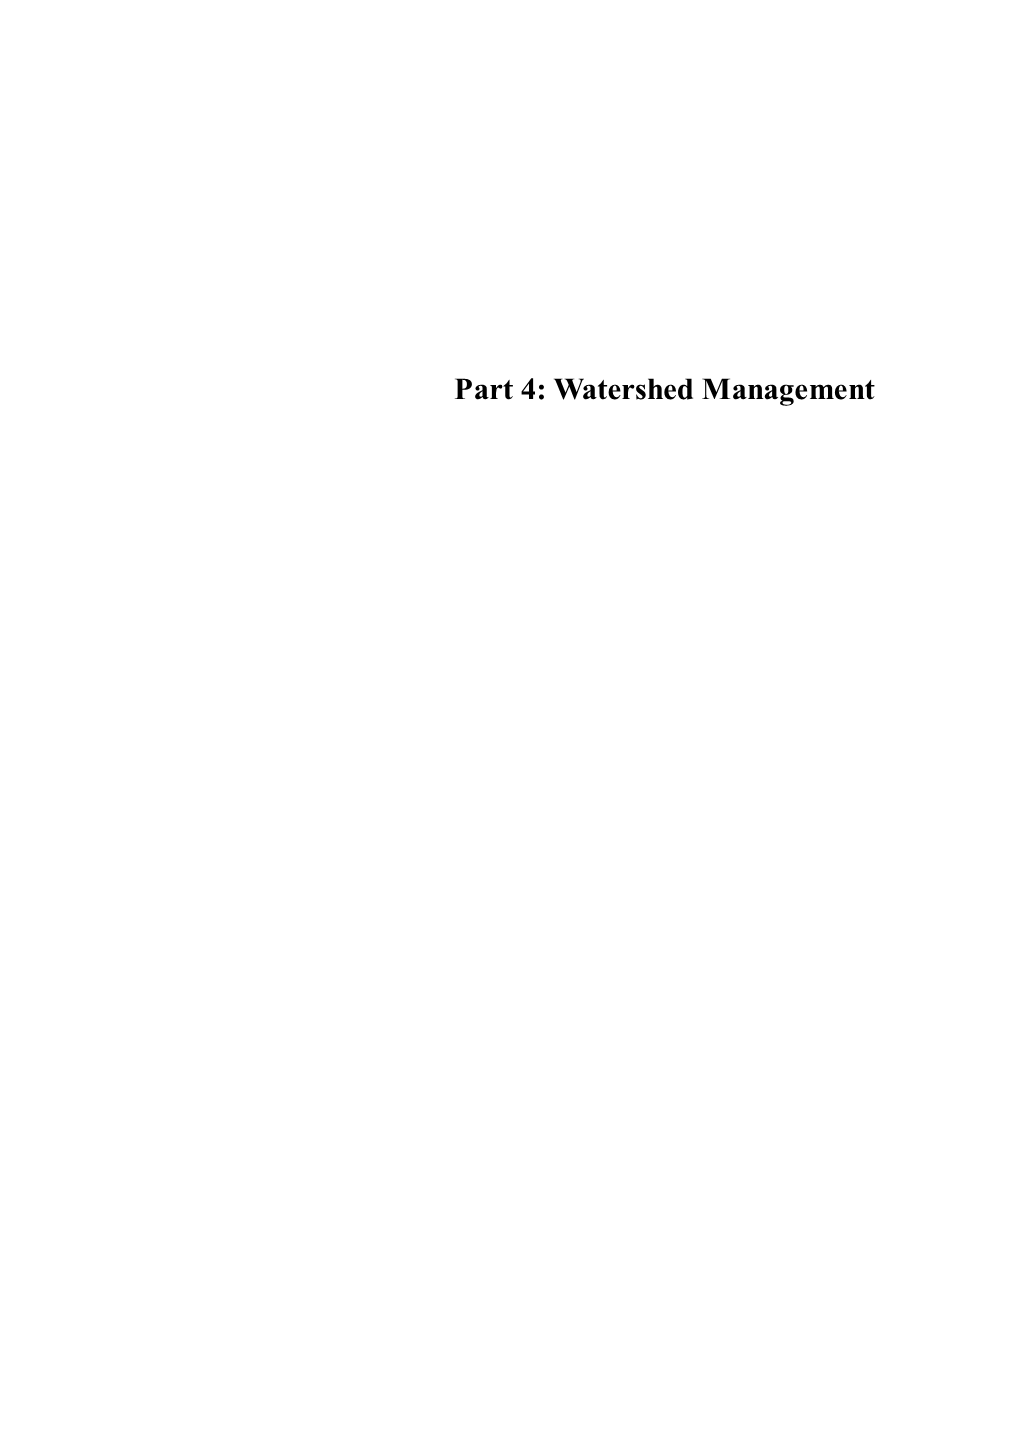 Part 4: Watershed Management